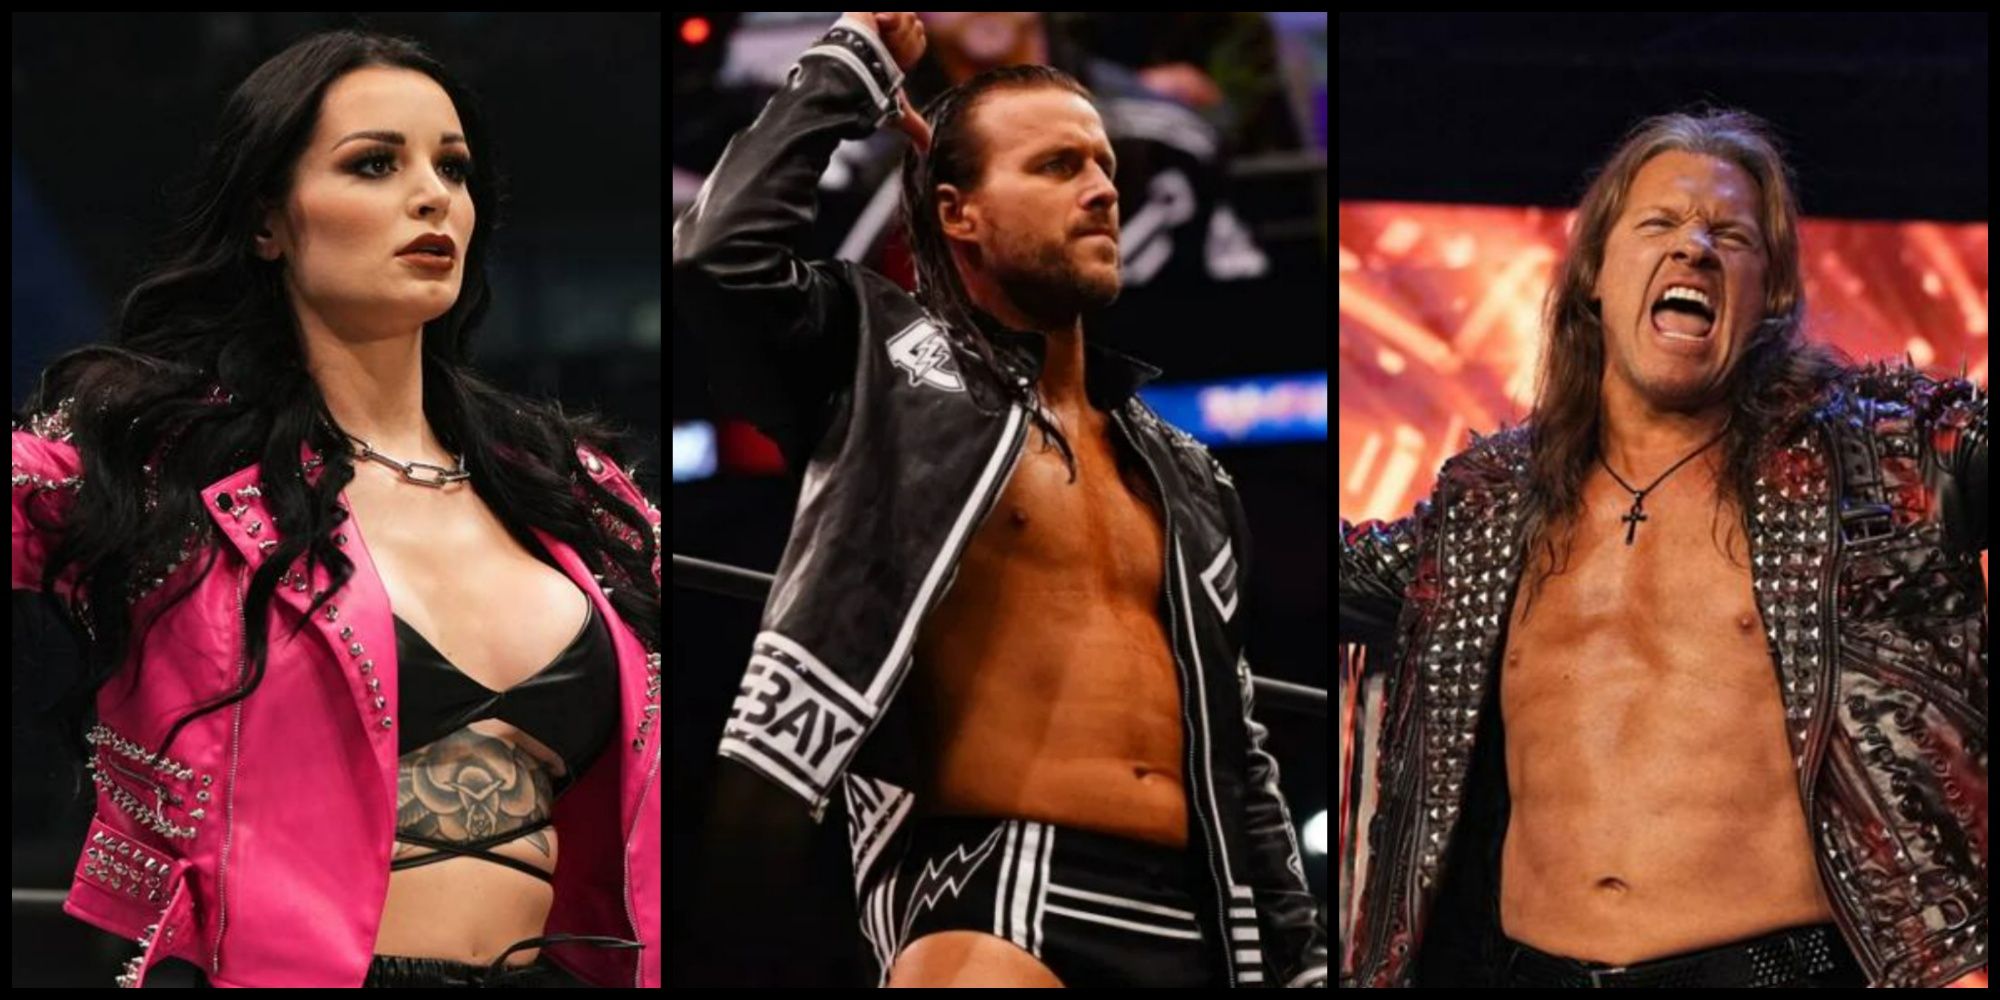 Saraya, Adam Cole, and Chris Jericho, all former WWE stars that now feature in AEW and their upcoming game AEW: Fight Forever